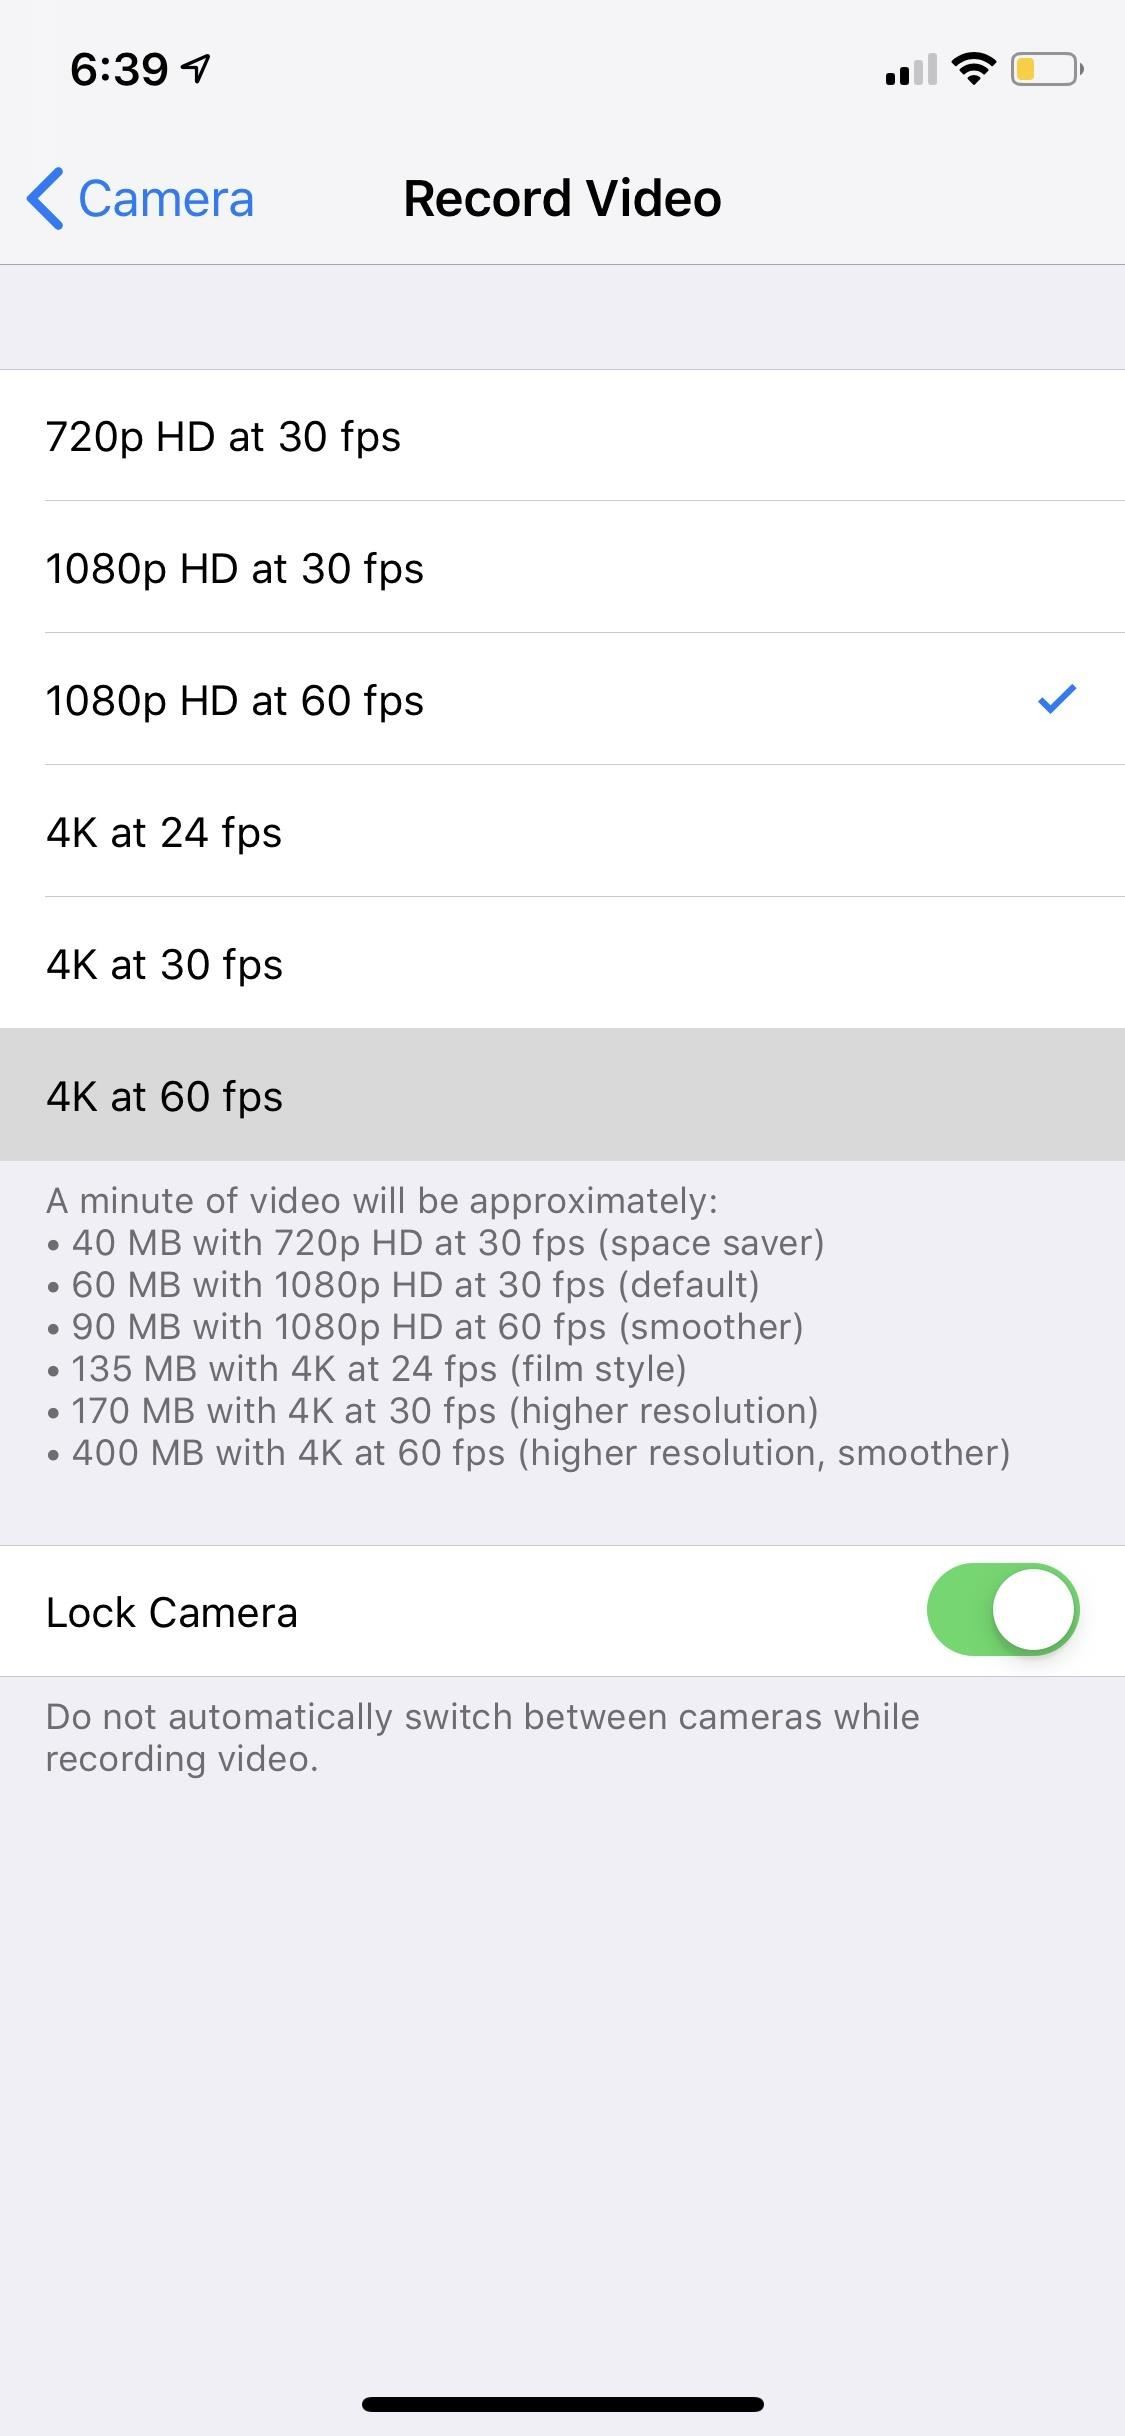 How to Enable 4K Recording in Your iPhone's Camera for Higher Resolution & Smoother Videos